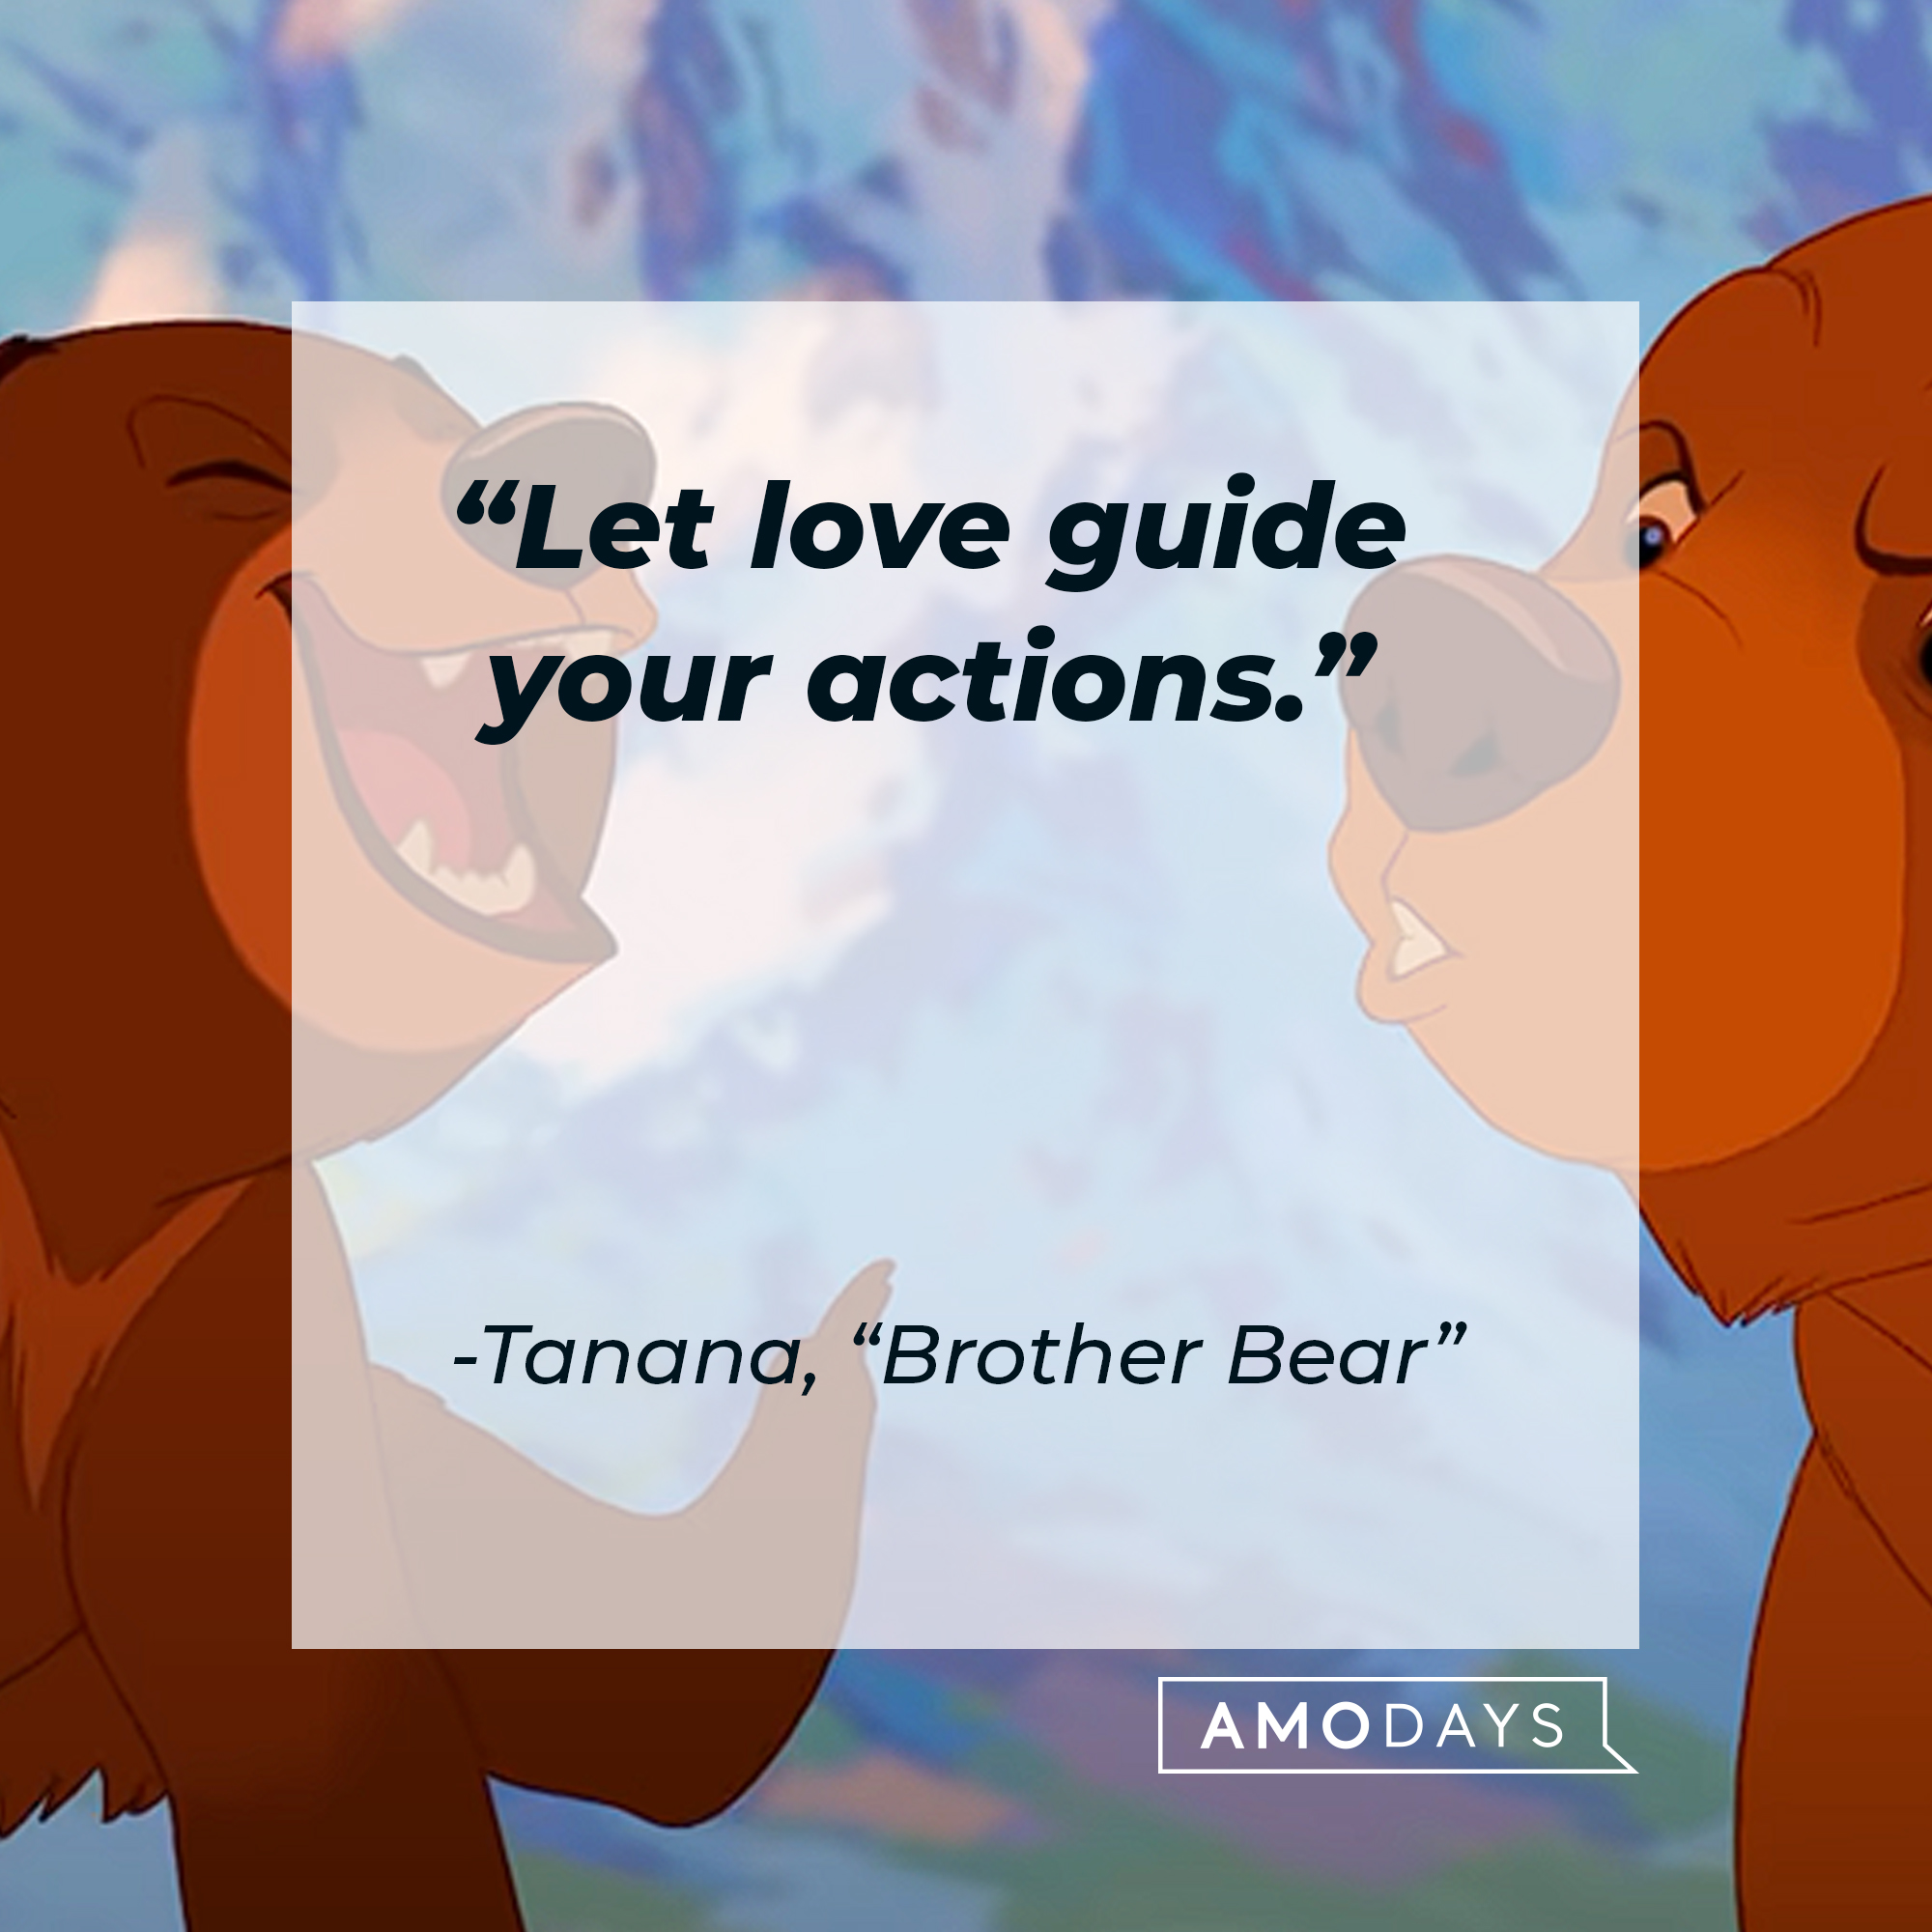 Tanana's "Brother Bear" quote: "Let love guide your actions." | Source: Youtube.com/disneyfr